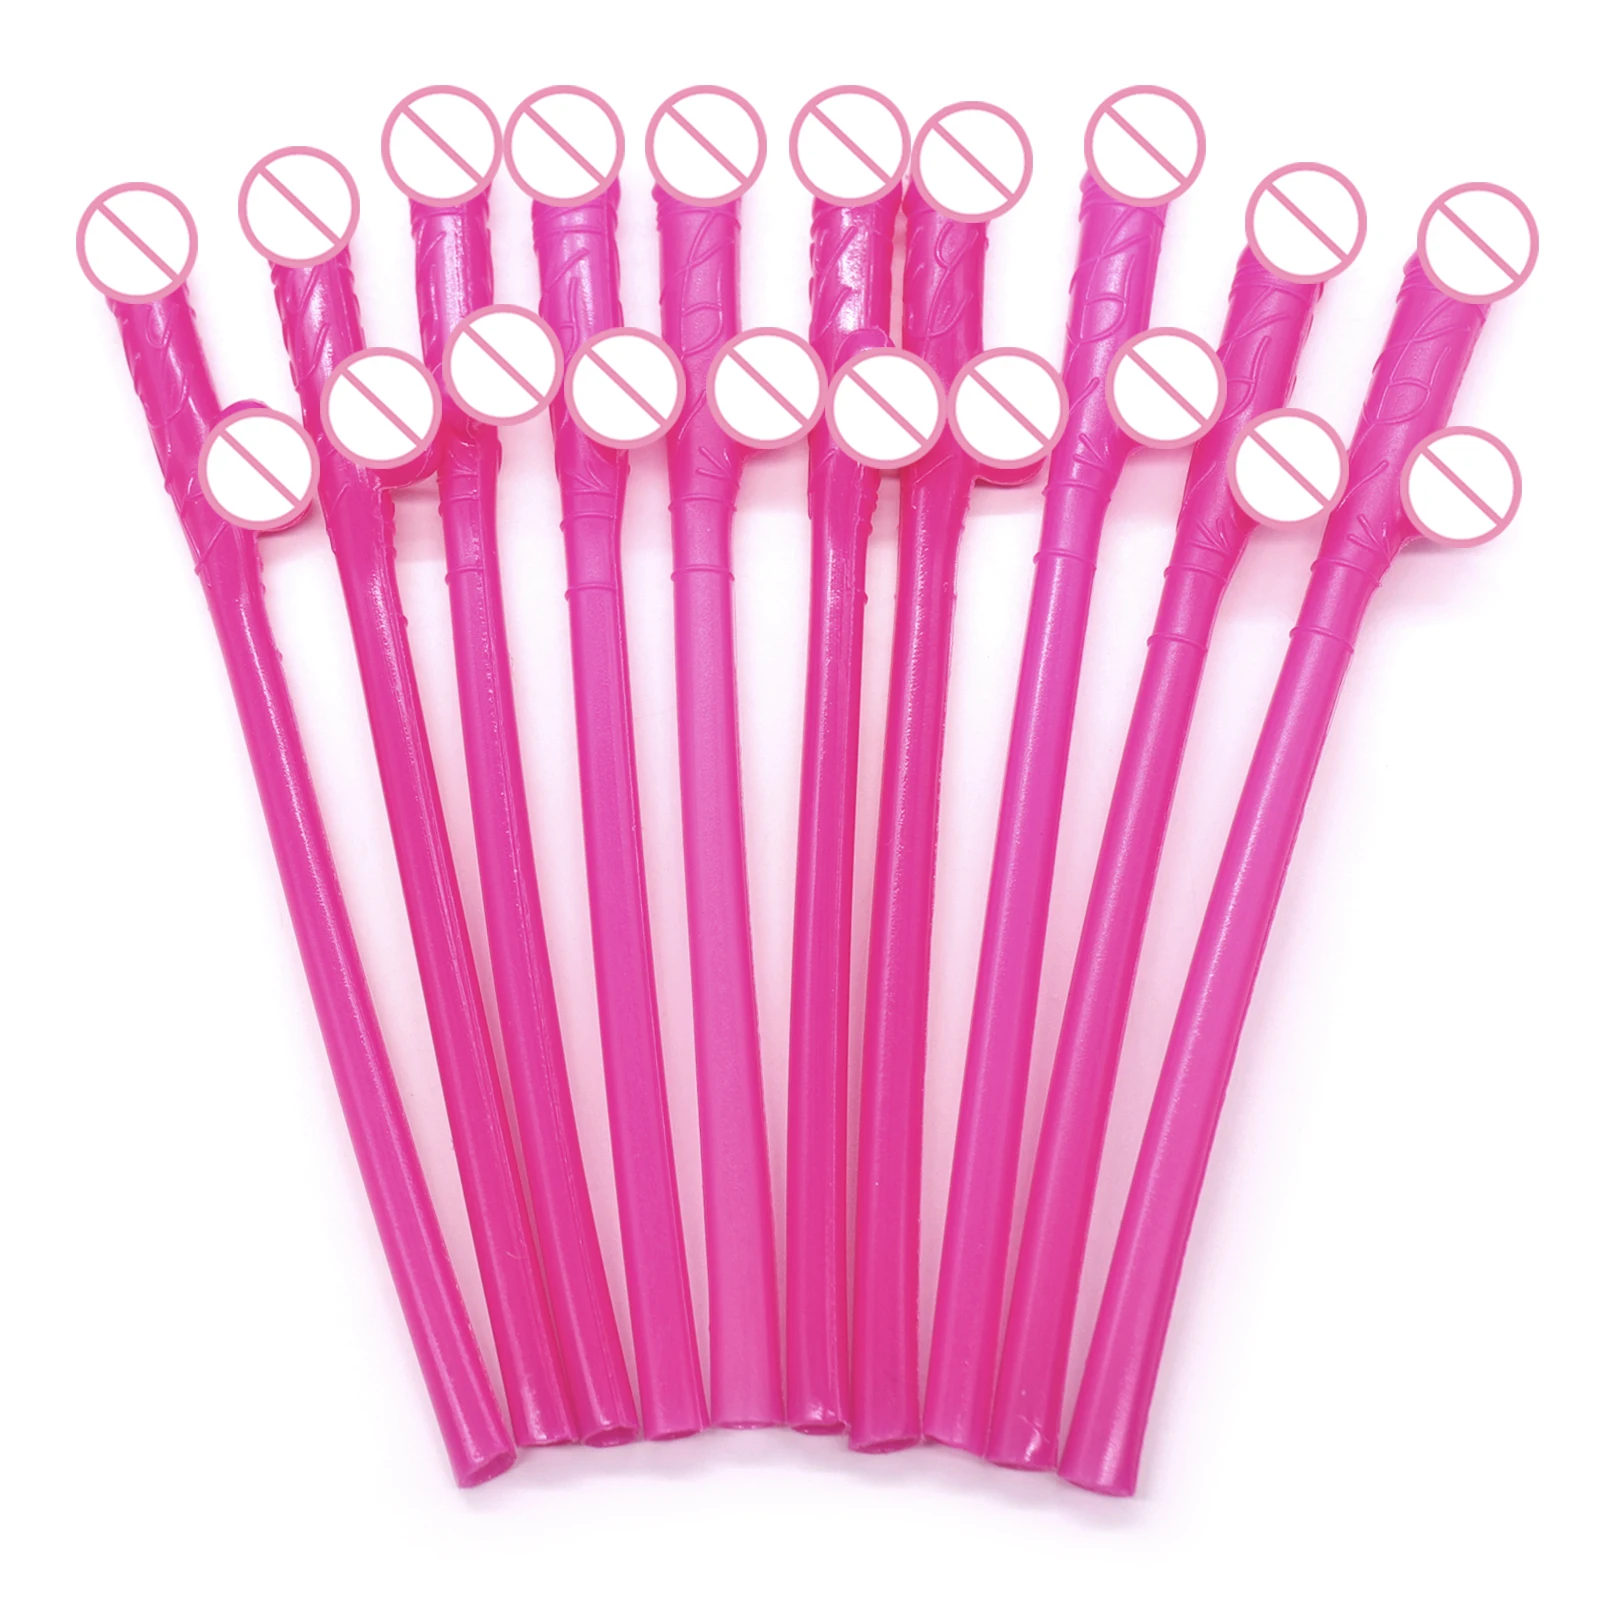 

10Pcs Funny Sexy Hen Night Willy Drinking Penis Novelty Nude Straw Plastic Straws For Bar Accessories Bachelorette Party Decor